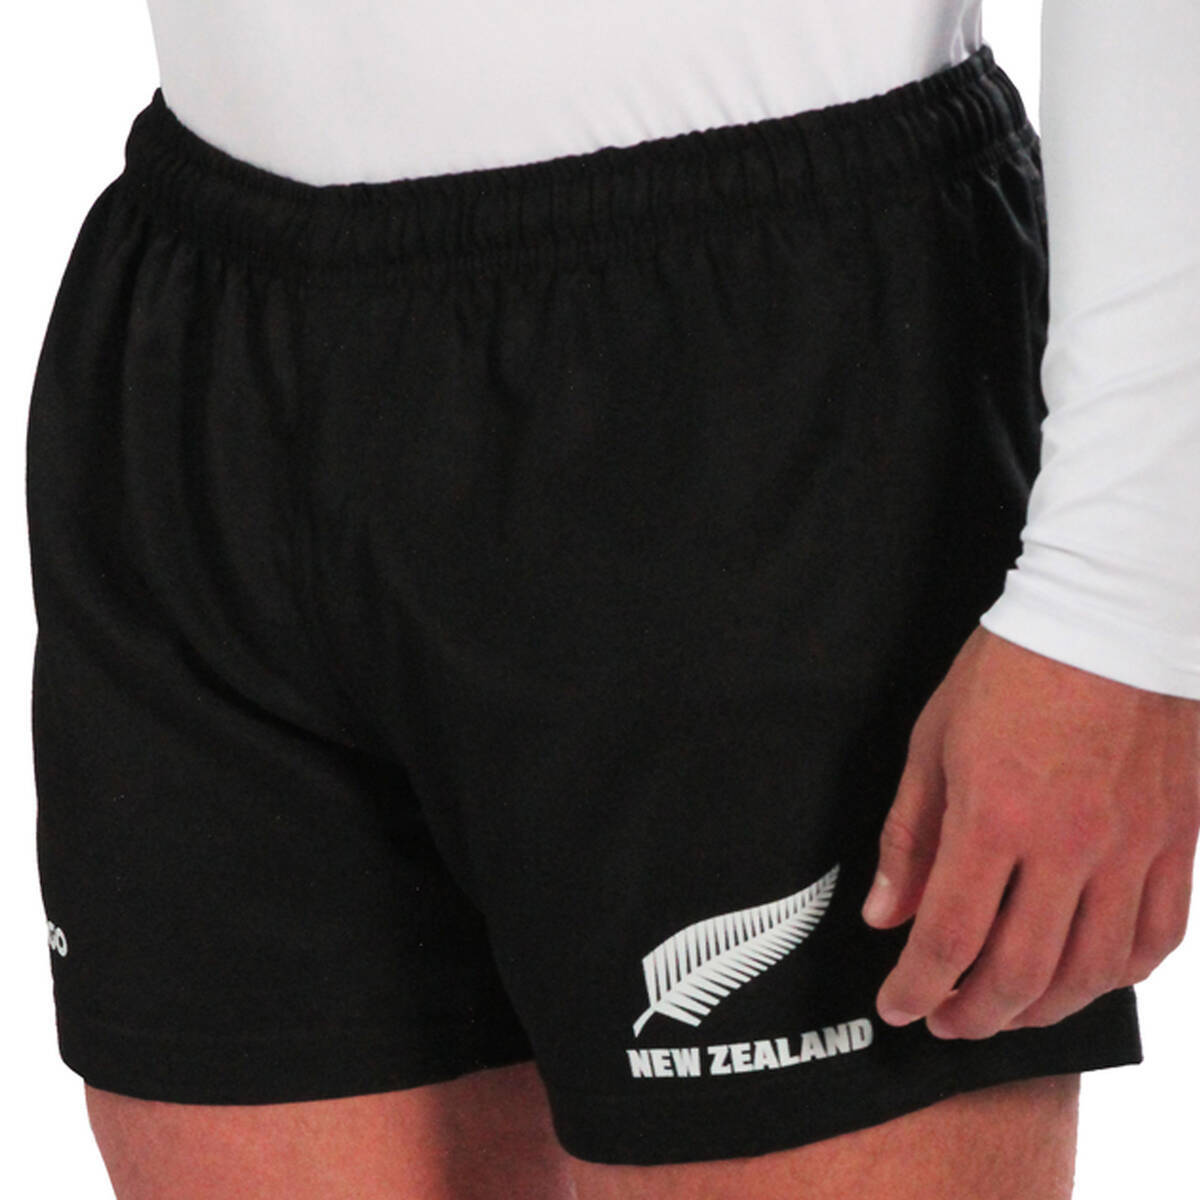 Imagen producto Short Rugby New Zealand  10